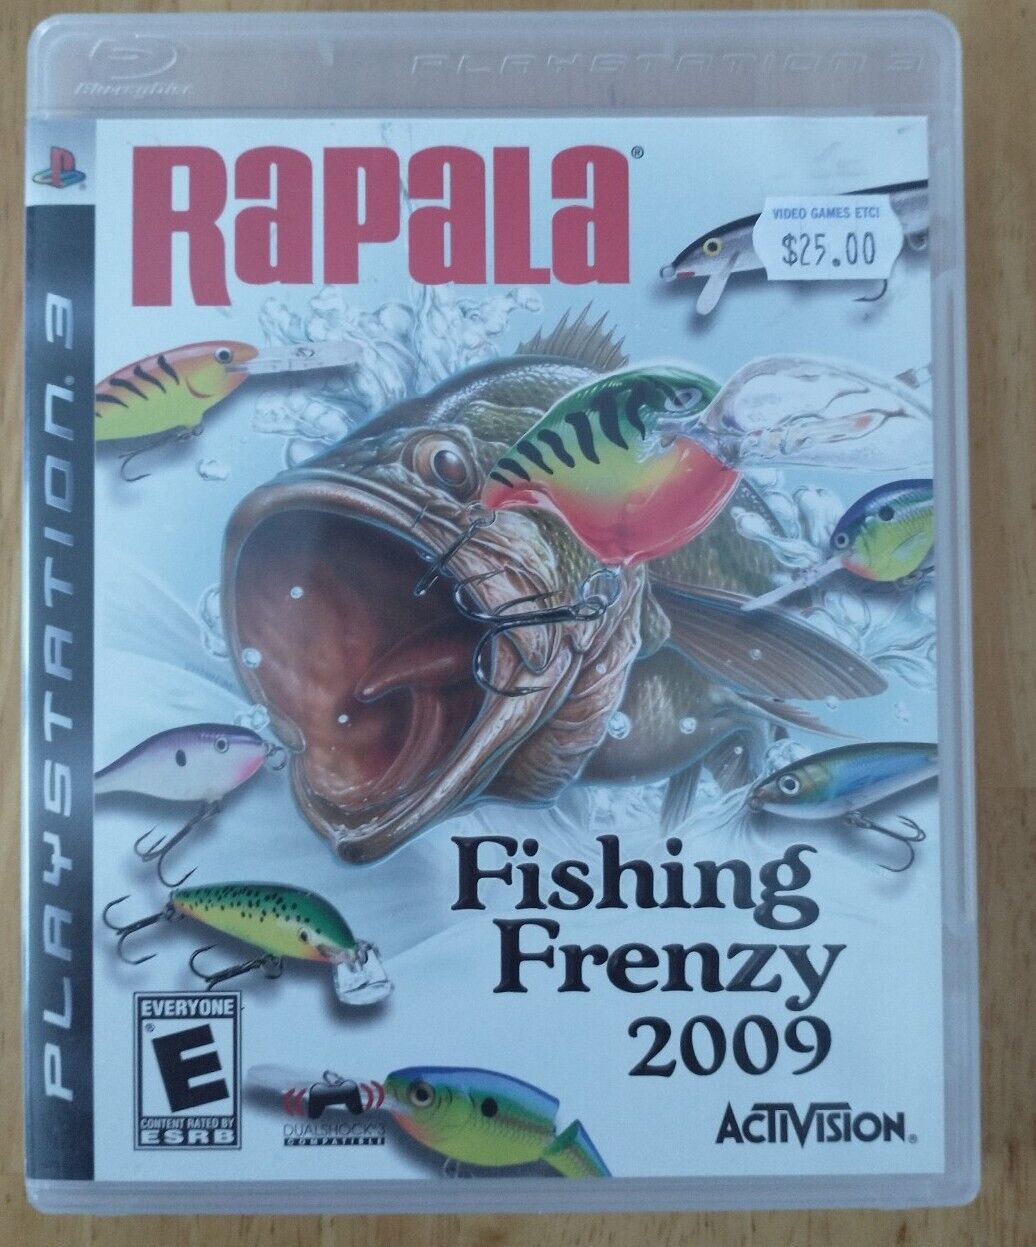 Rapala: Fishing Frenzy 2009 (Sony PlayStation 3, 2008) COMPLETE 47875755079